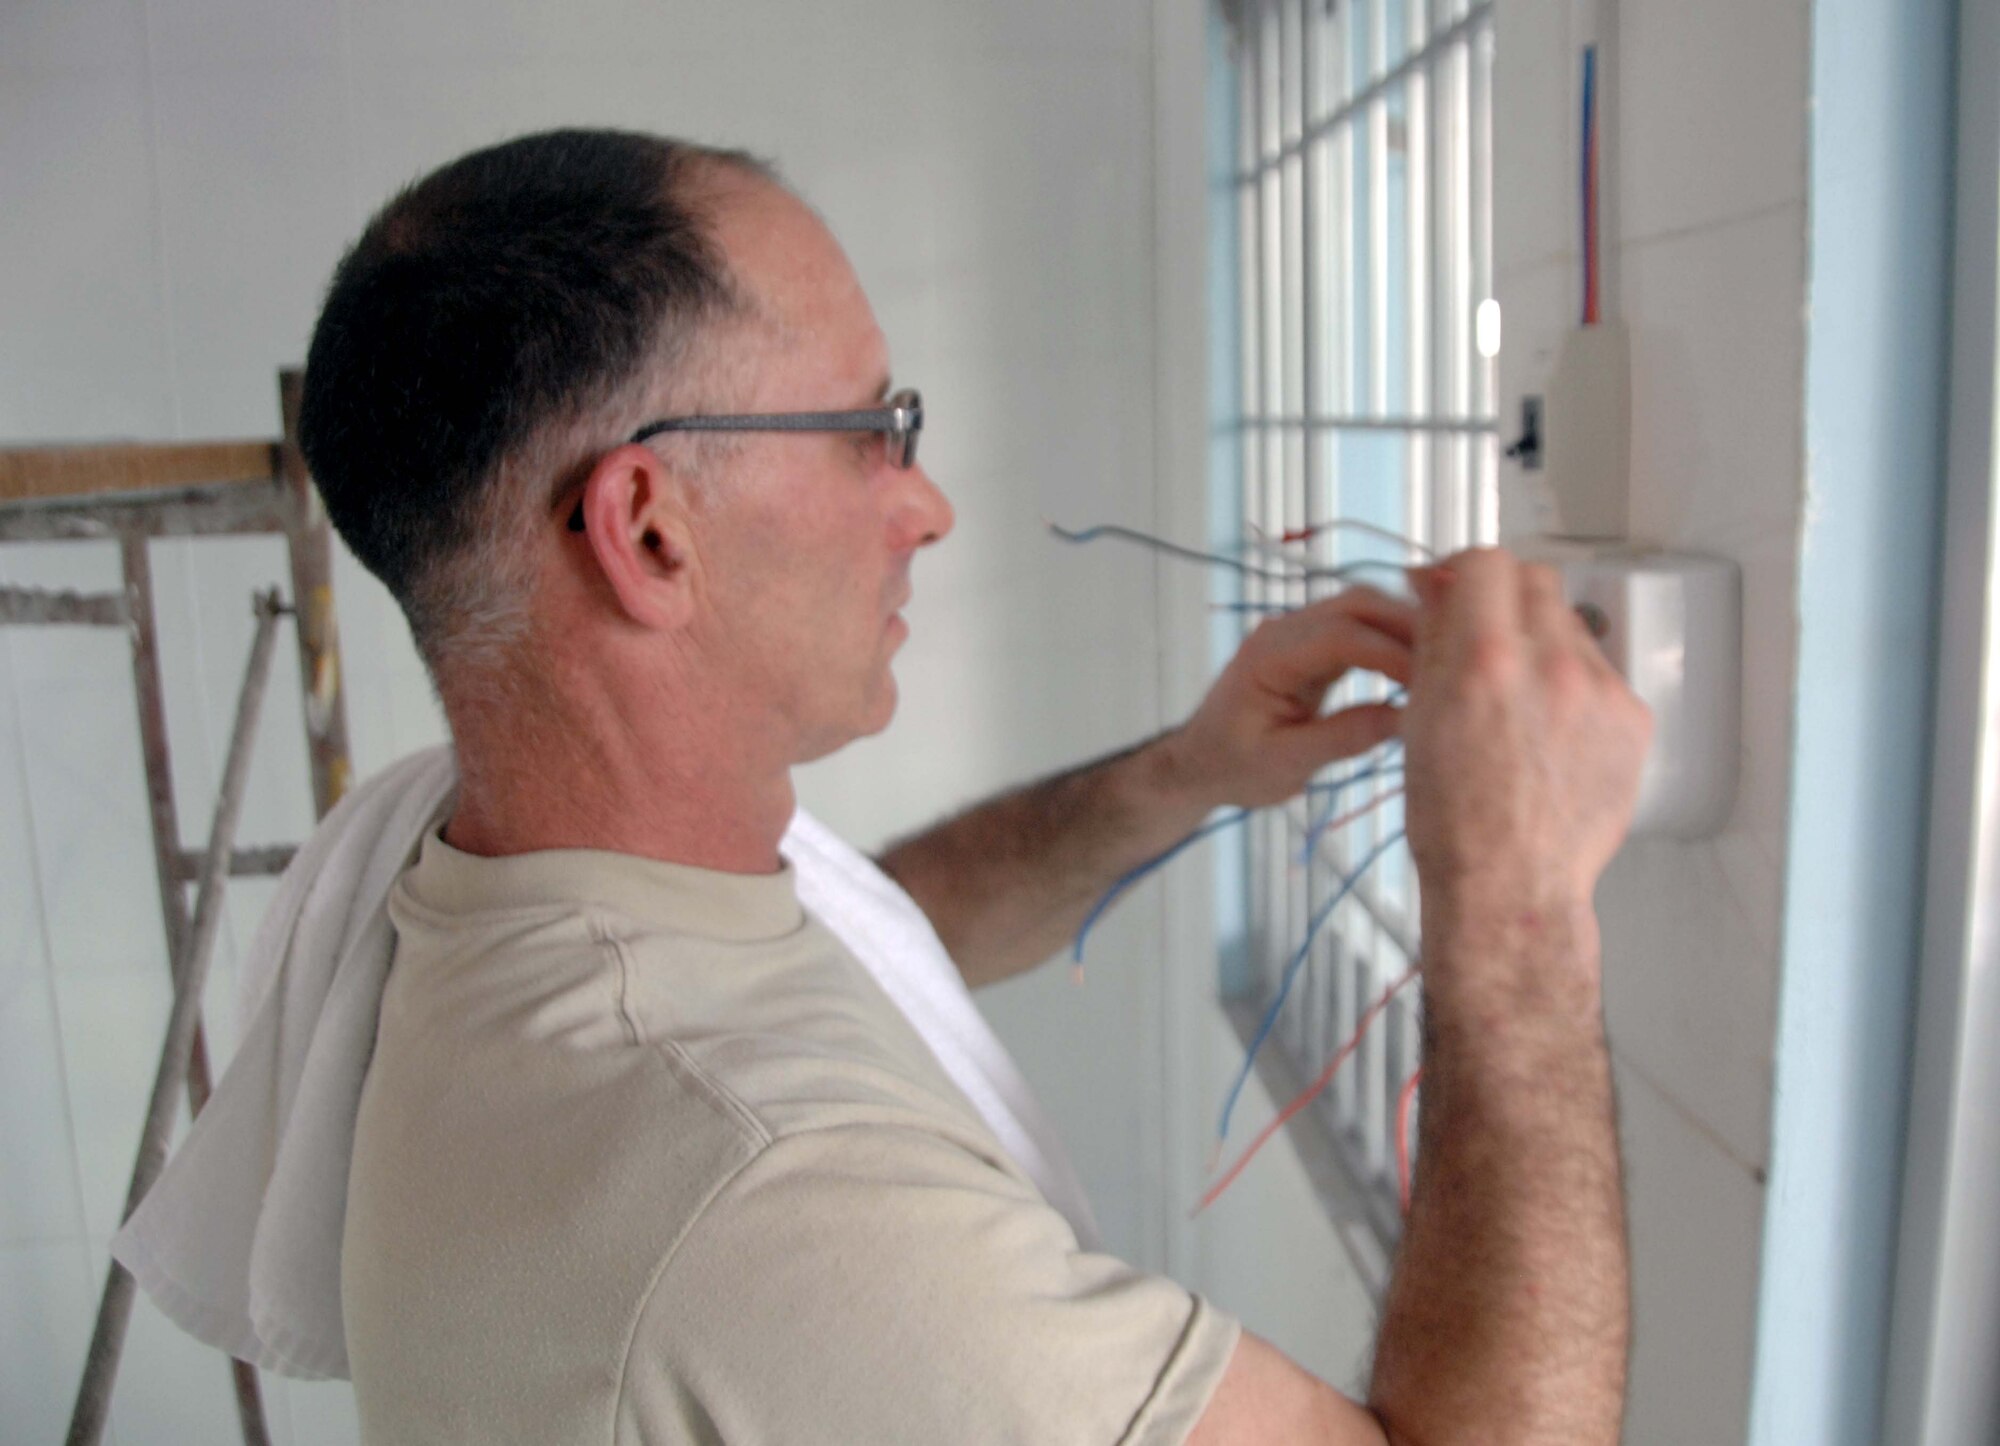 Master Sgt. John Swearingin, from the 176th Civil Engineer Squadron at the Anchorage Alaska Air National Guard, works on an electrical wiring box at the village medical clinic in Truong Thanh, Vietnam, as part of Operation Pacific Angel May 10. Pacific Angel is a joint and combined humanitarian and civic assistance operation conducted in the Pacific in support of U.S. Pacific Command's capacity building efforts. (U.S. Air Force photo/Capt. Timothy Lundberg)